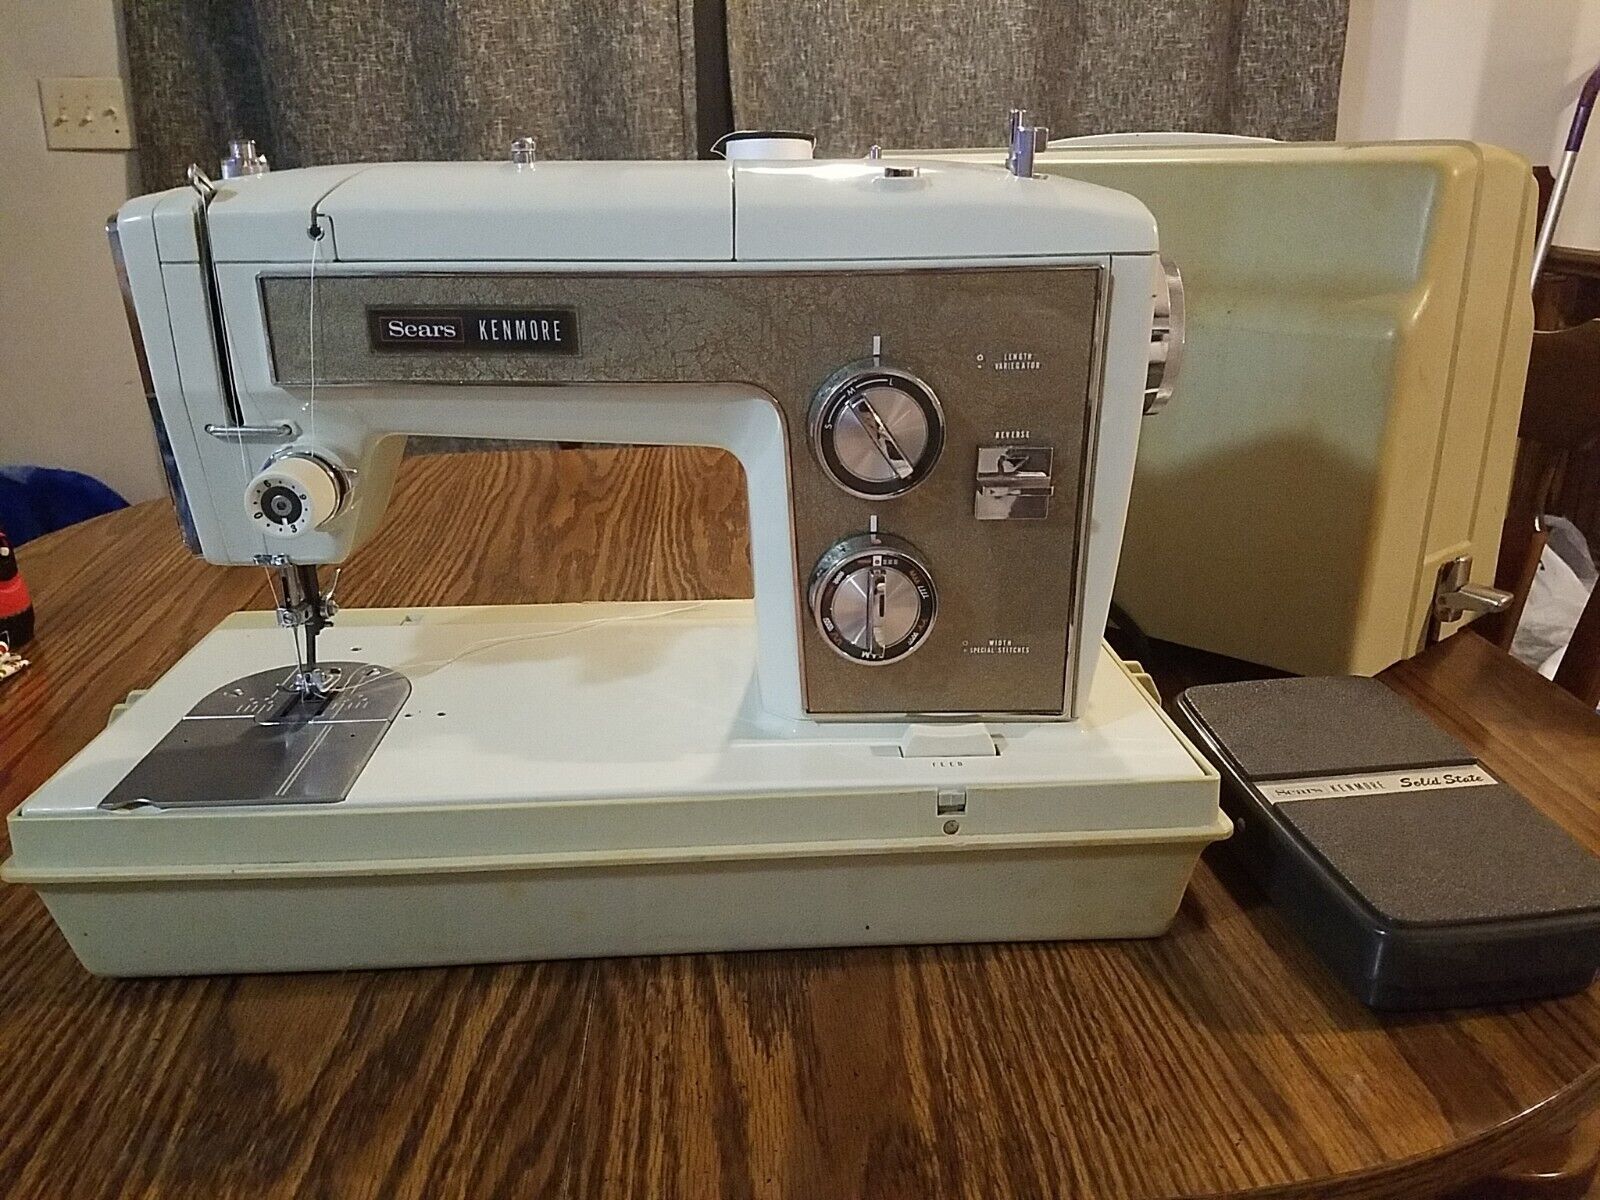 Sears Kenmore Vintage Sewing Machine Model 158.17033 With Case